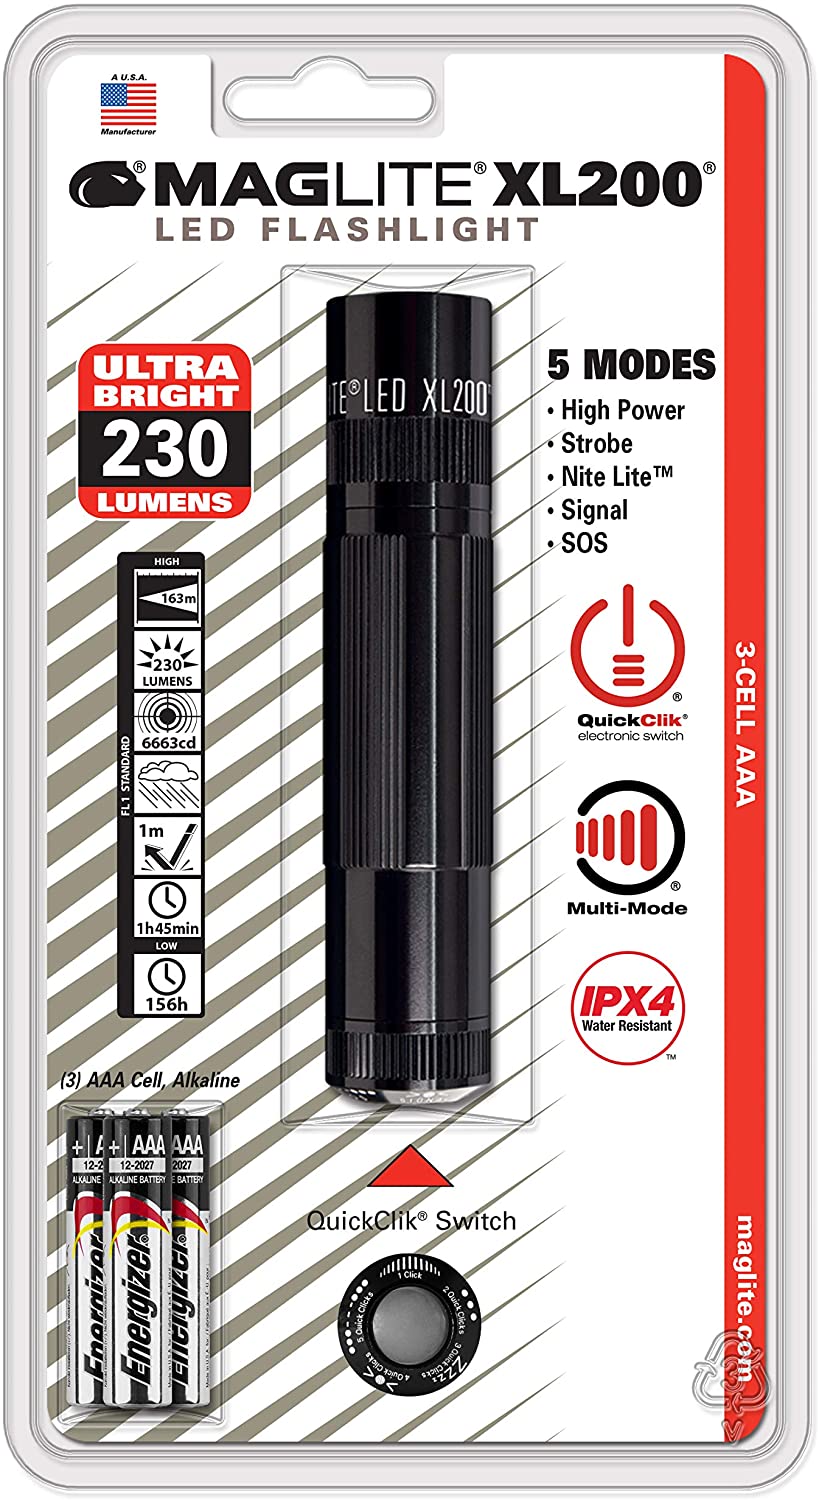 MAGLITE XL200 3-Cell AAA LED Flashlight, Black, Blister Pack #XL200-S3016L